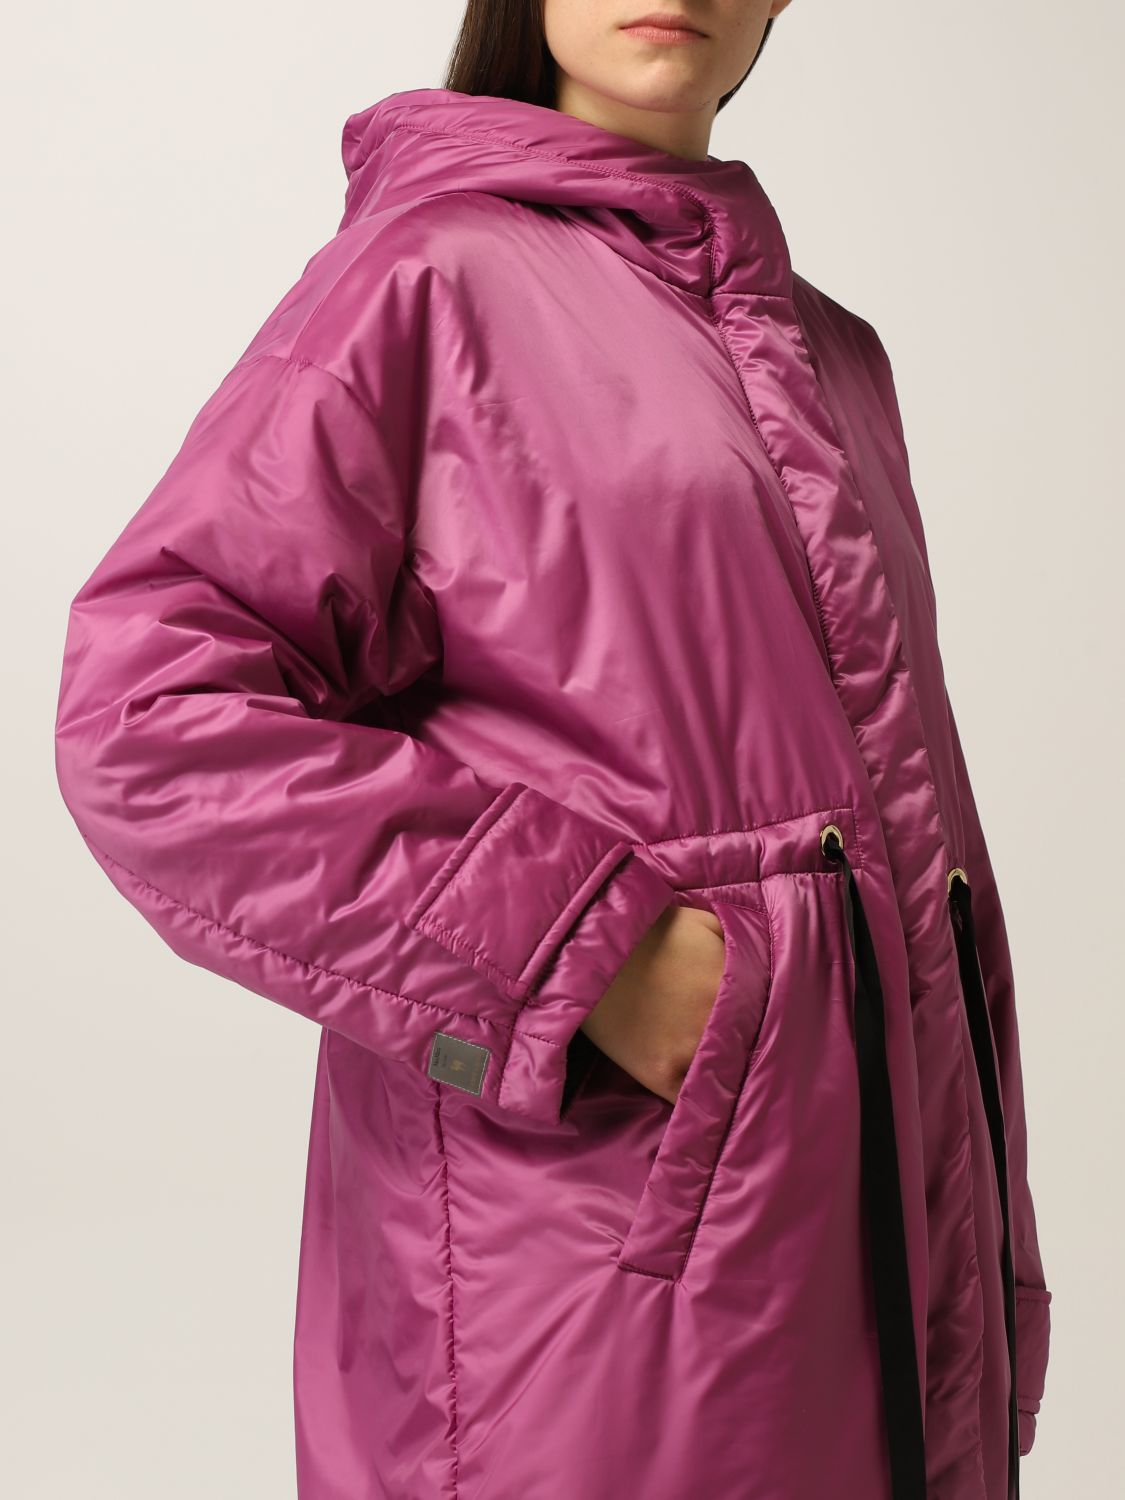 jacket for woman - Pink  Max Mara The Cube jacket 2394811237600 online at